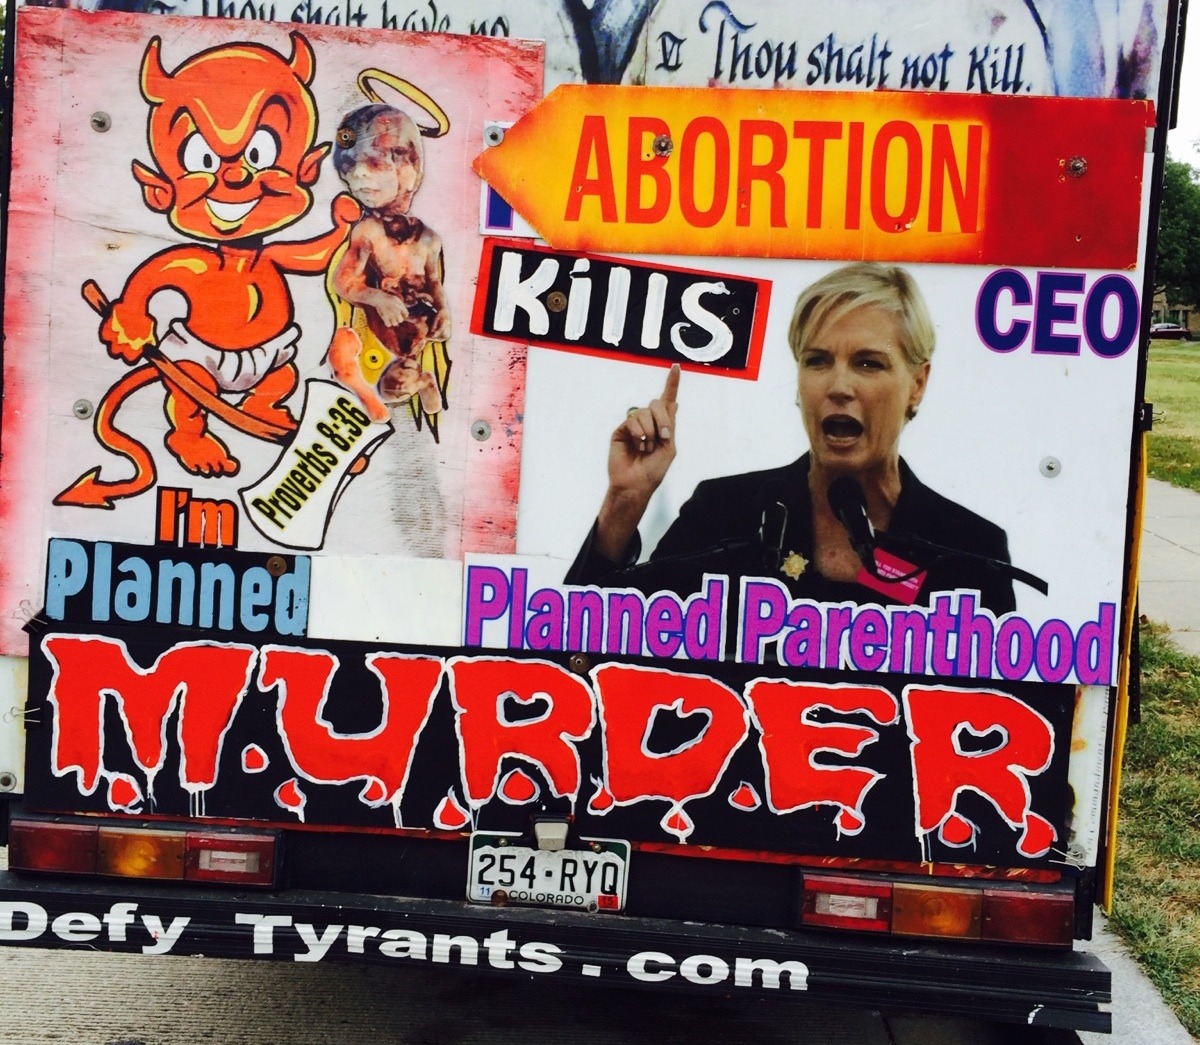 The Hired Hucksters of Anti-Abortion Hate